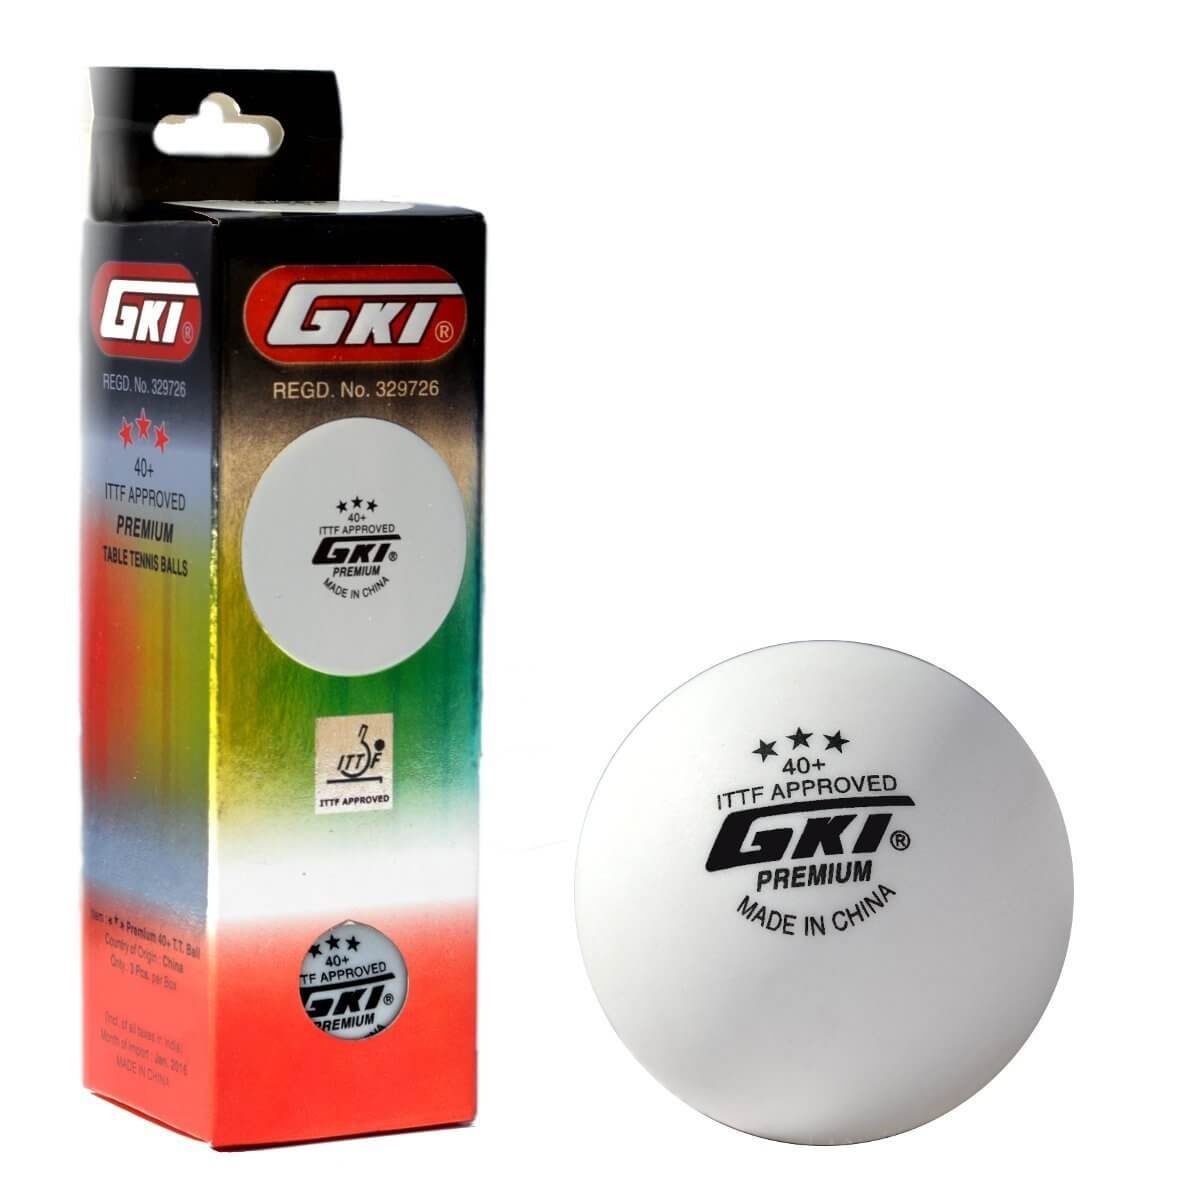 Pack of 12 Plastic Ping Pong Balls